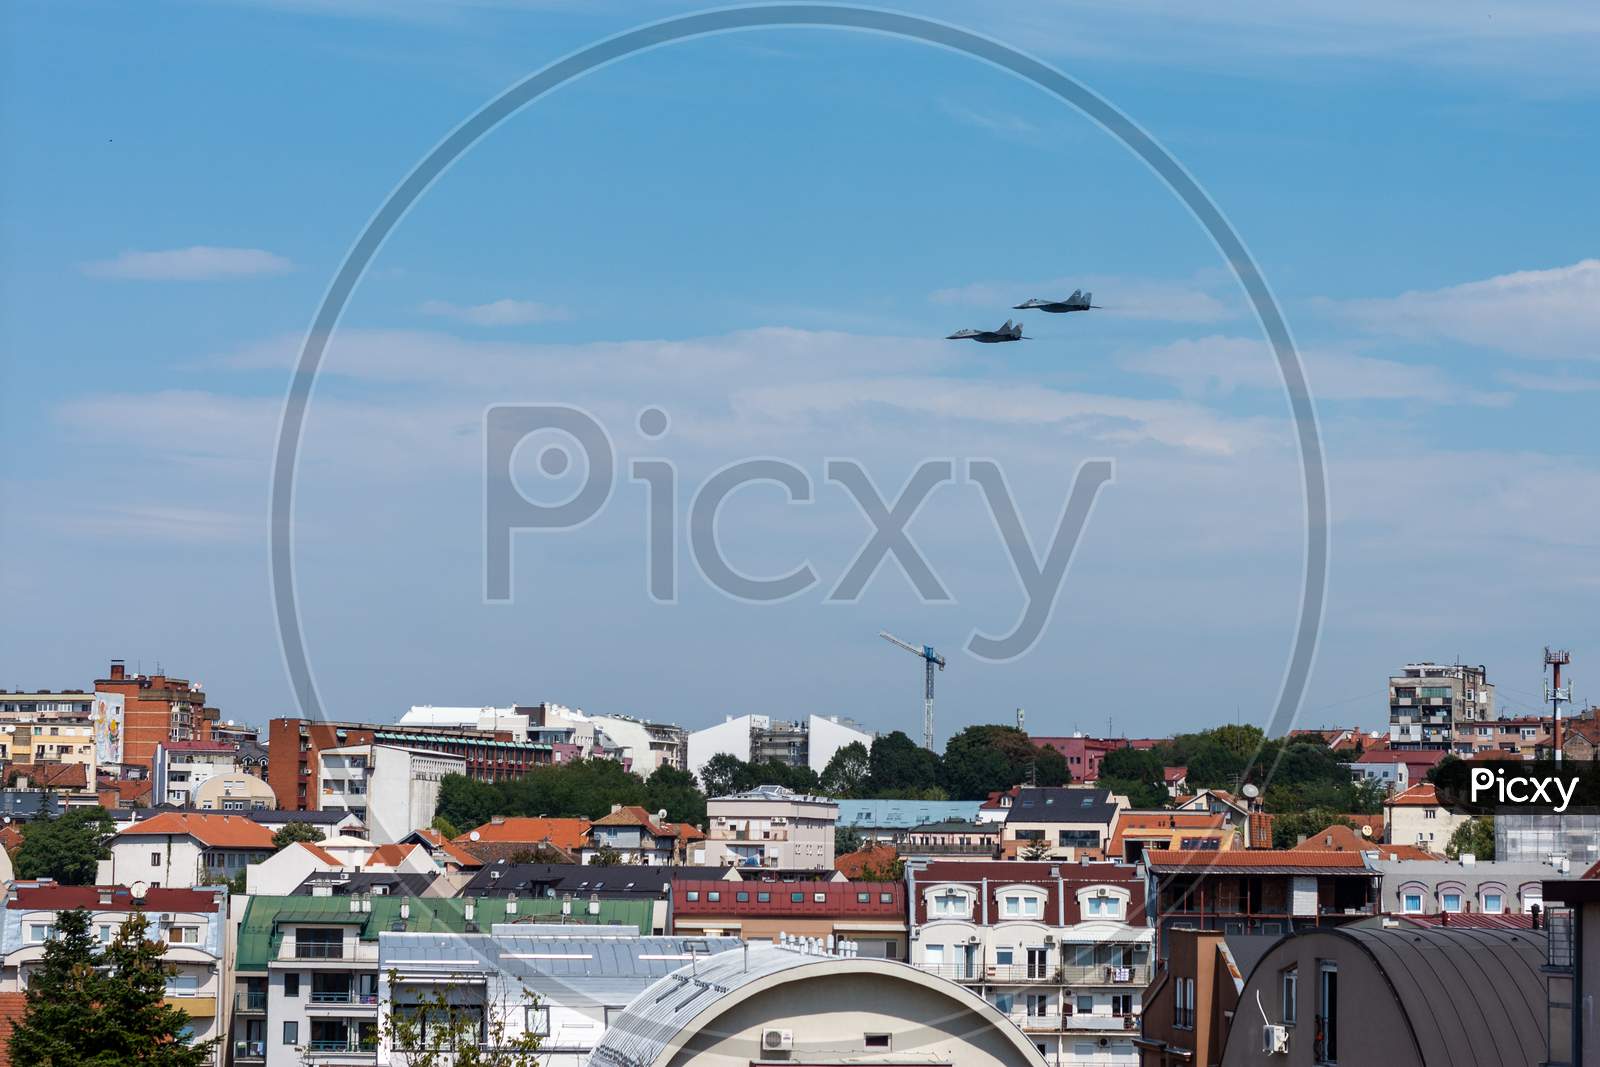 Serbian Air Force Mig-29 Jet Fighters In Low Flight Over Belgrade, Serbia